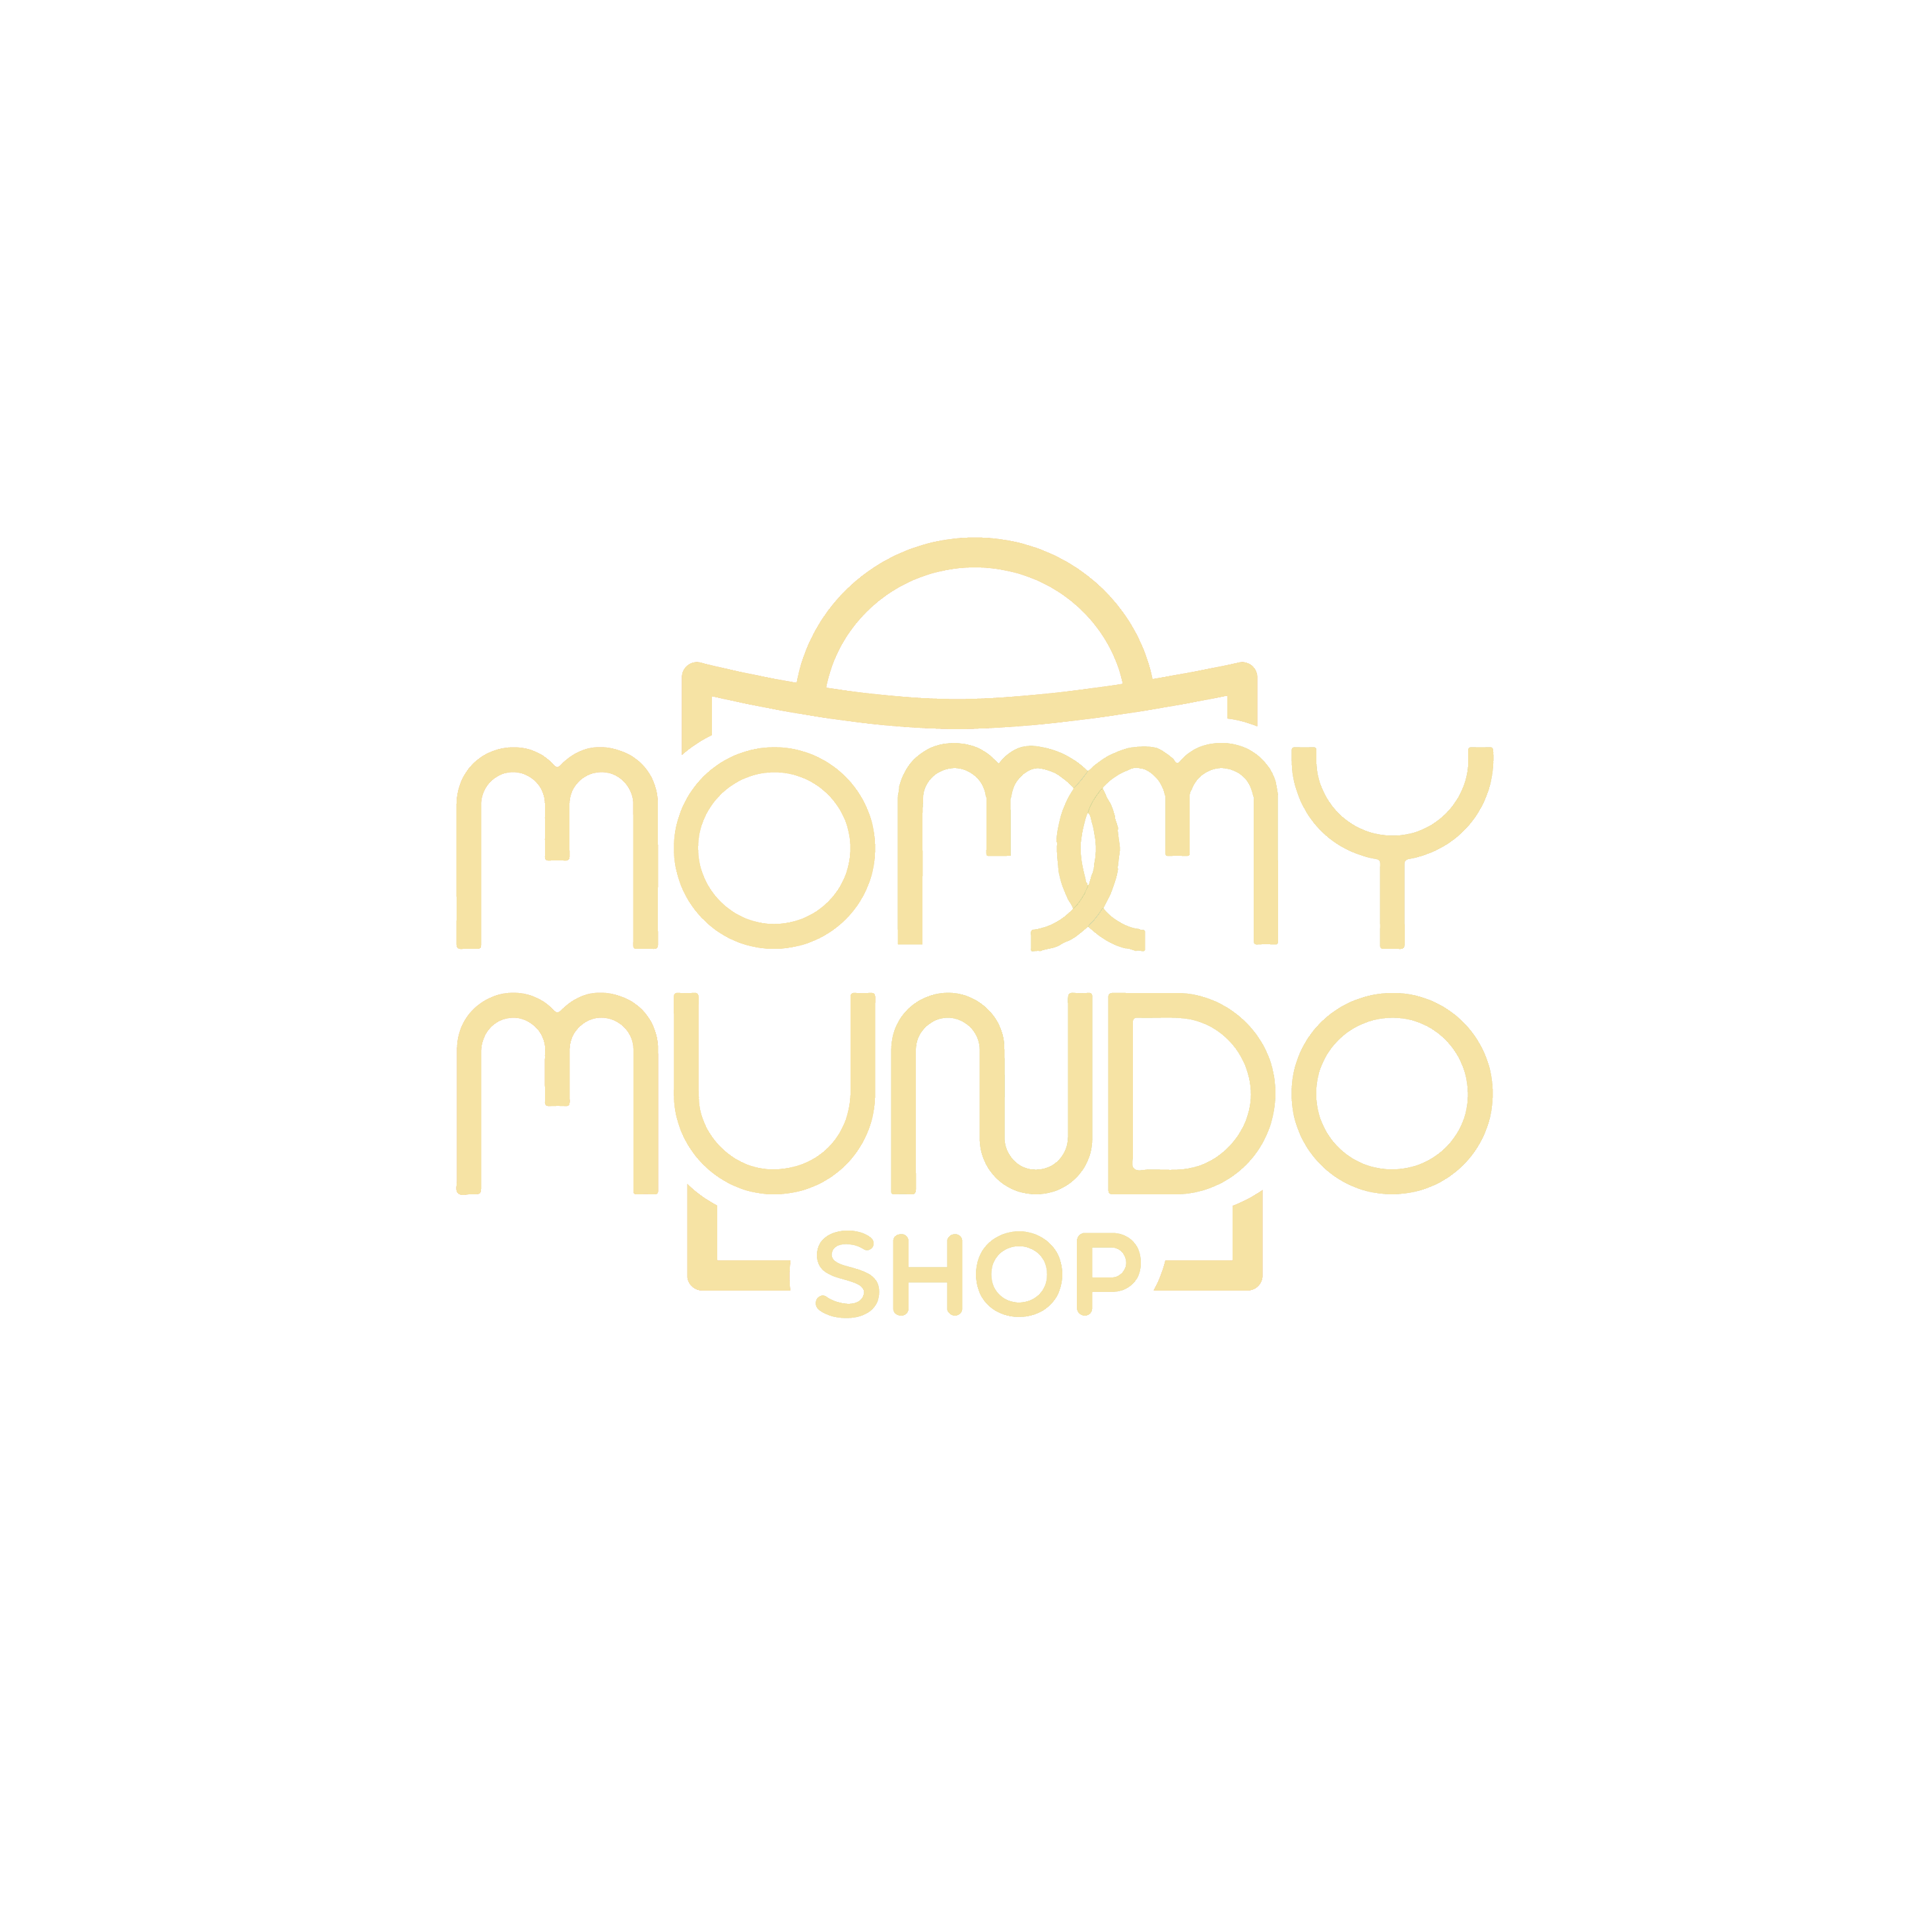 Shopify Store Design for Mommy Mundo Philippines